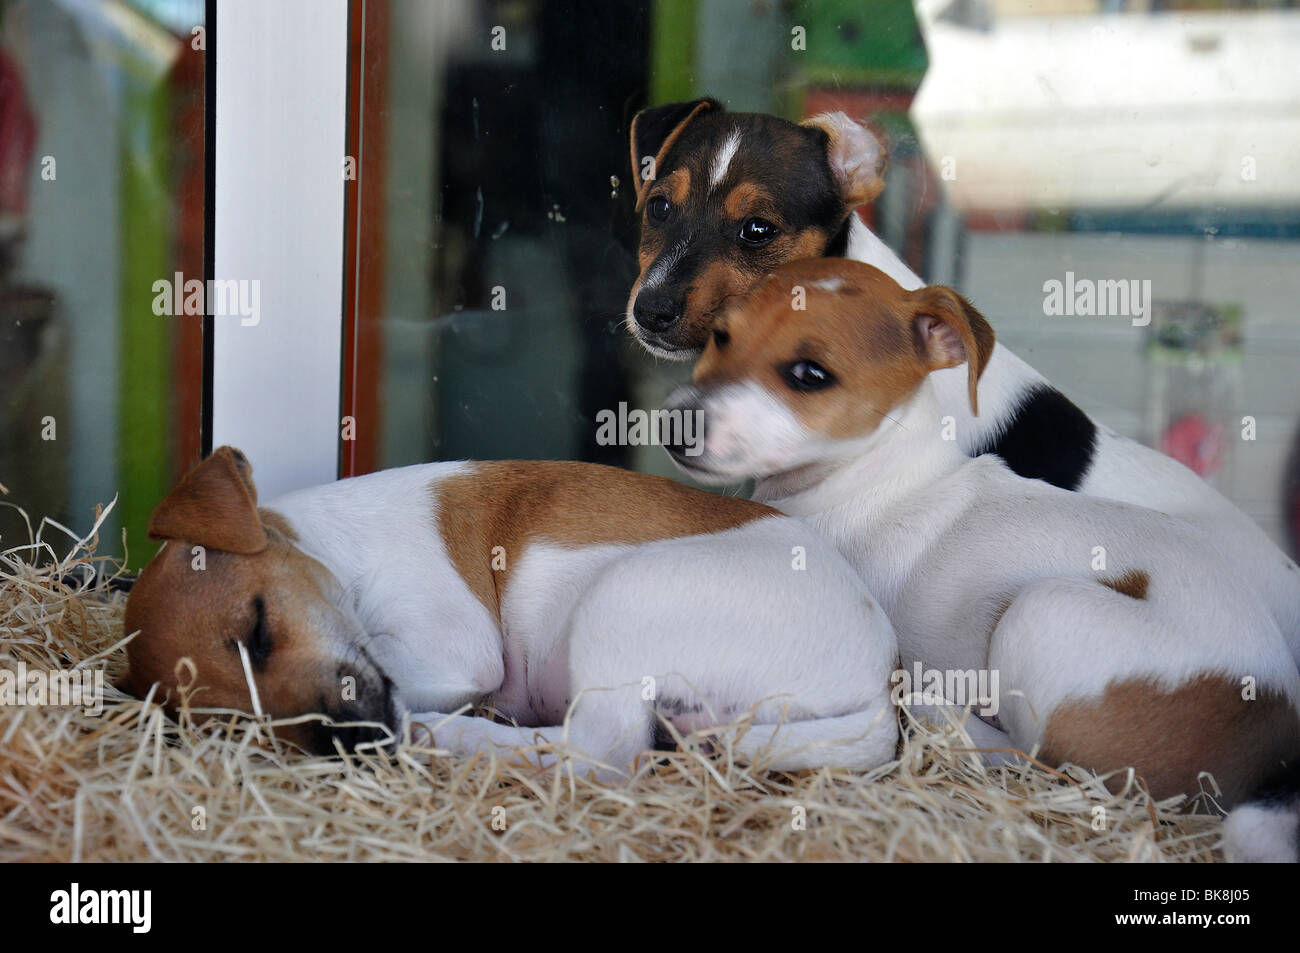 Puppies for sale  in shop window Stock Photo